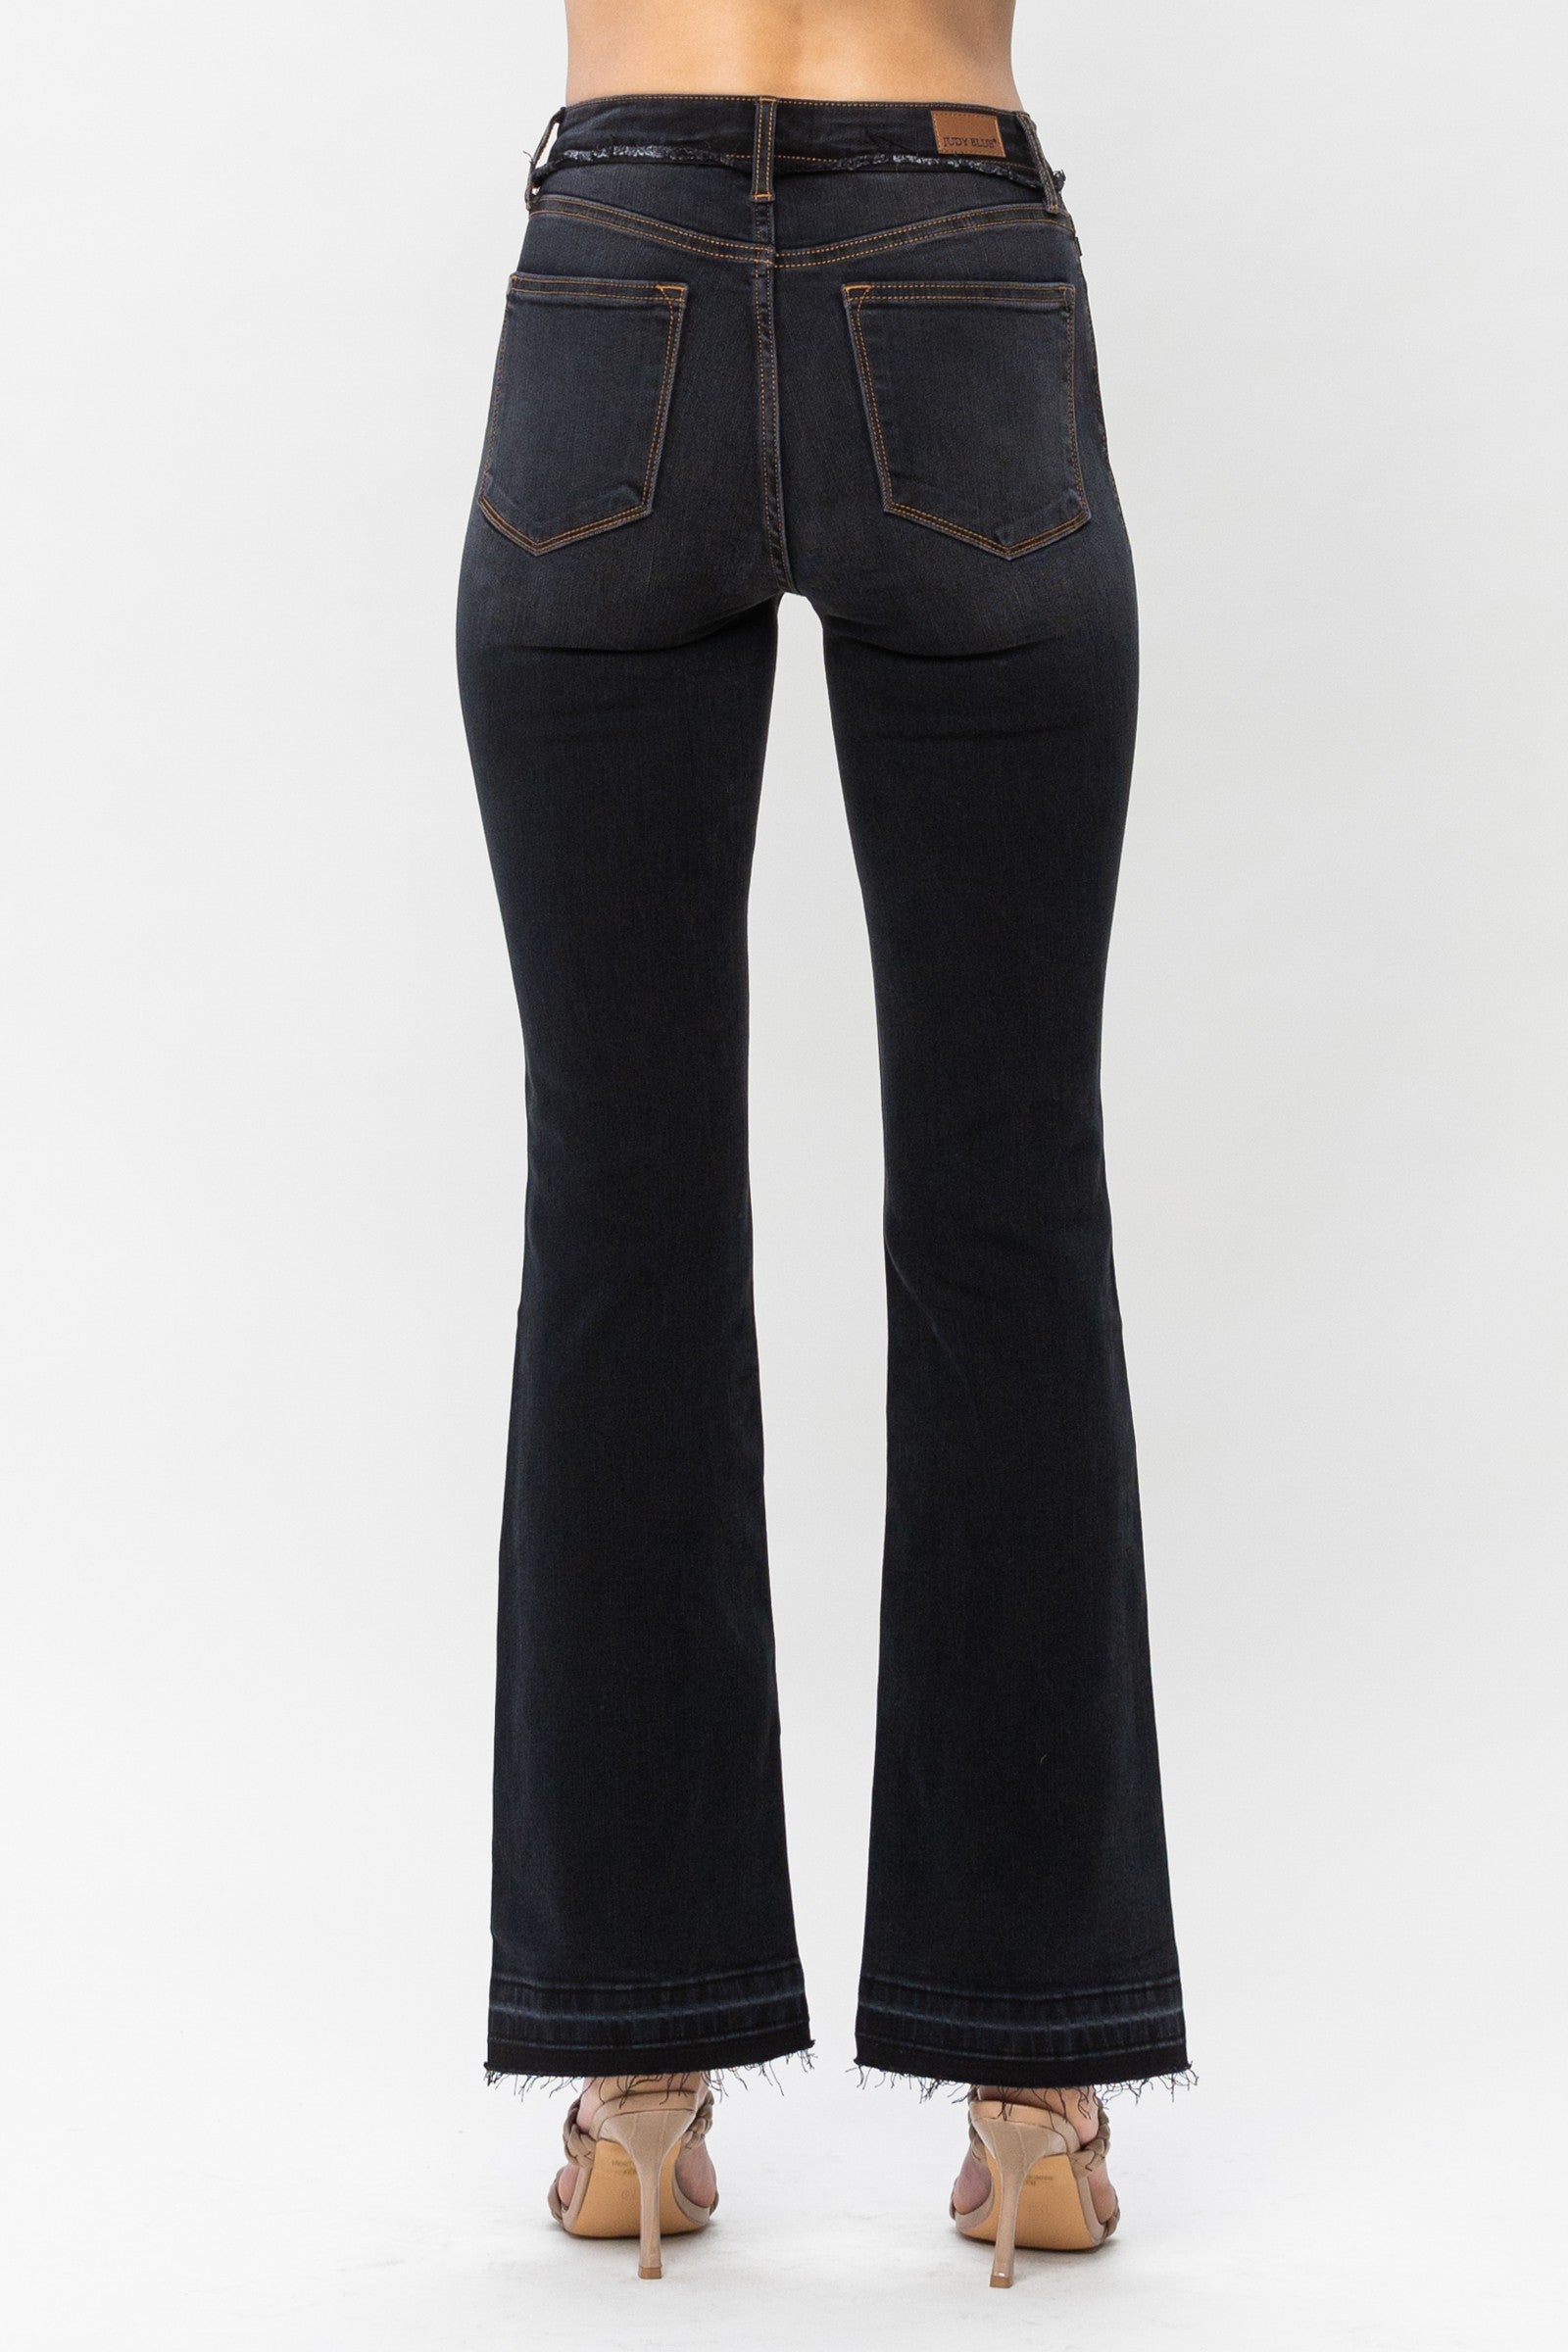 Black High Waist Release Hem Slim Bootcut - Judy Blue  Slim Boot Cut Release Hem High Waist FRONT RISE: 10.63" INSEAM: 32" 65% Cotton, 21%Rayon, 11% Poly, 3% Spandex Color: Black The Black High Waist Release Hem Slim Bootcut by Judy Blue is perfect for a day out. These stylish boot cut jeans feature a modern slim fit, high waist and flattering release hem. Get ready to look your best anytime, anywhere.